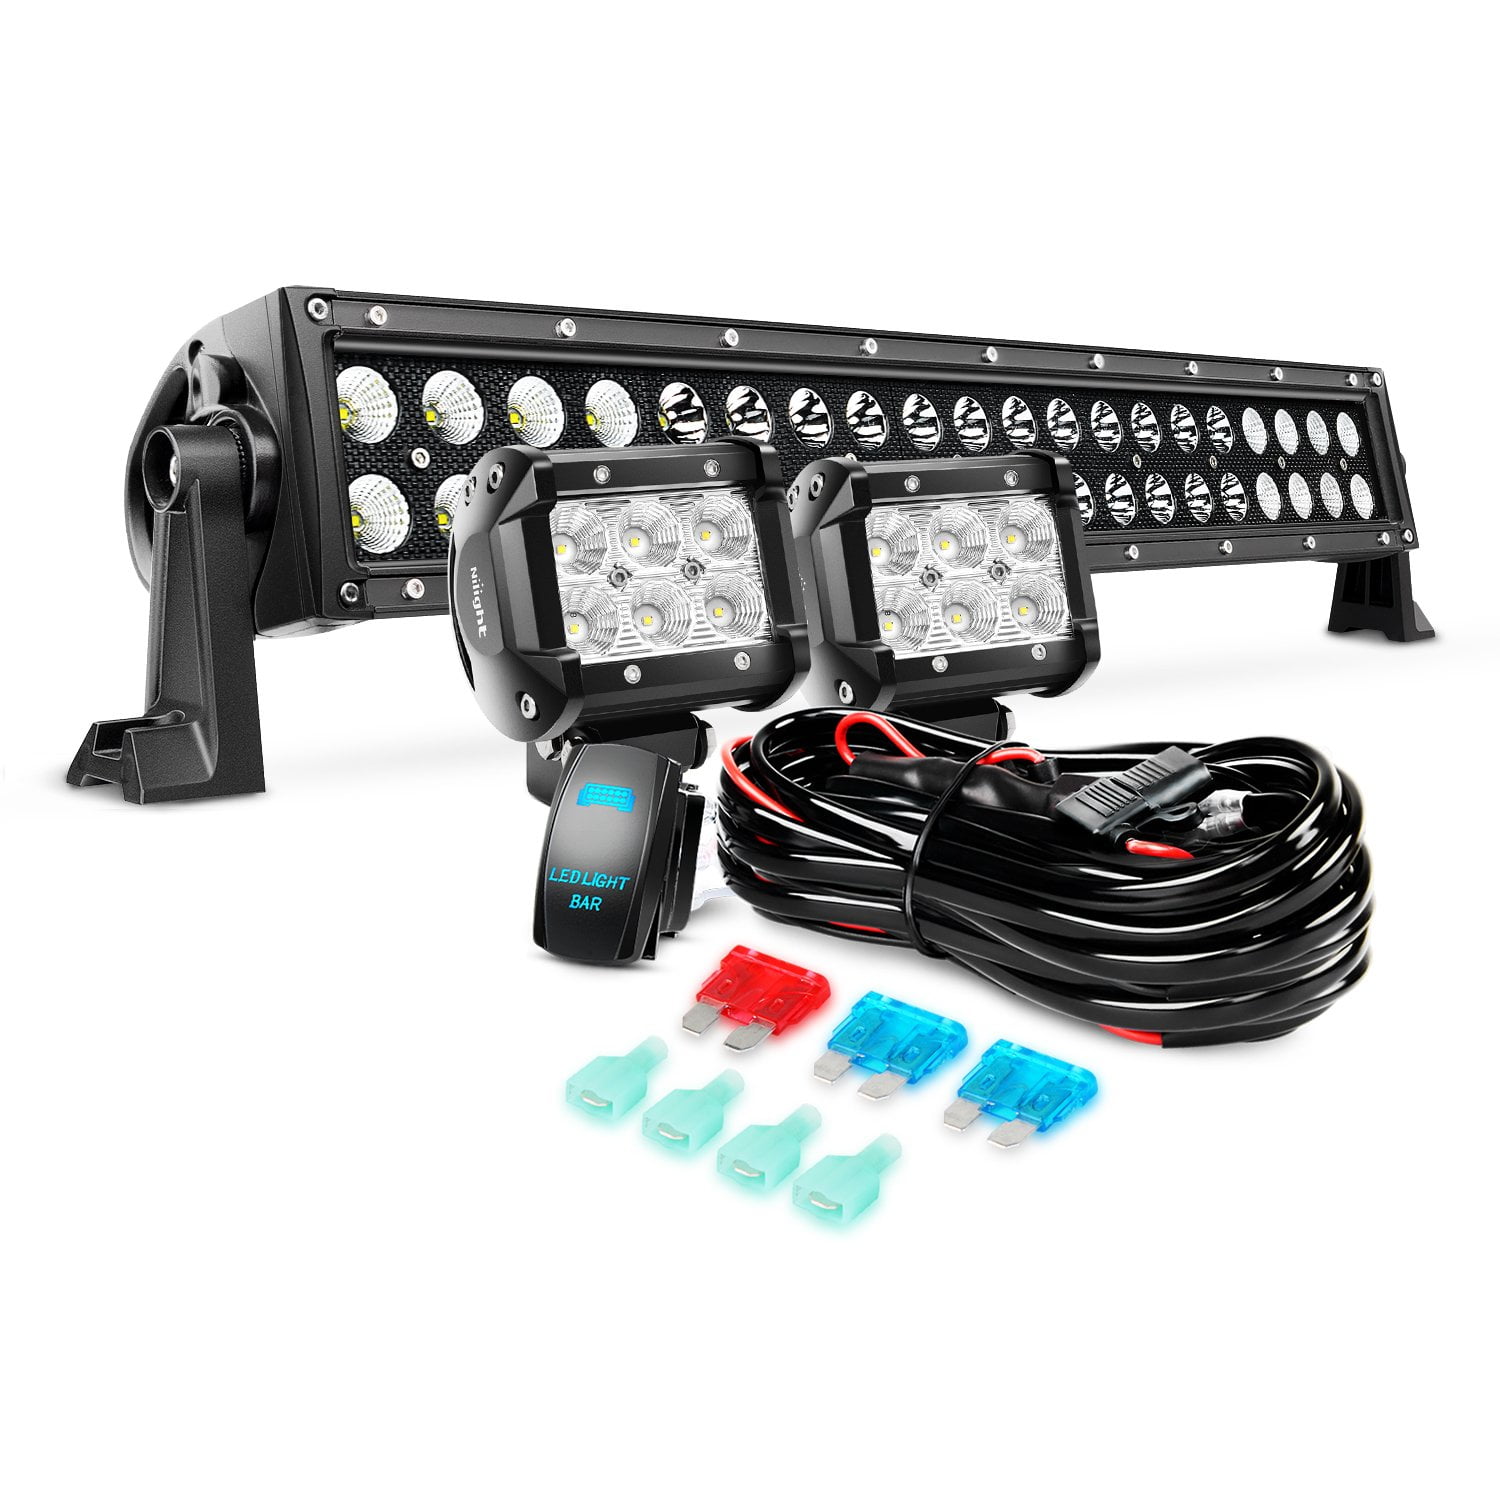 Single Row Spot 13inch 60W Led Light Bar Driving Fog Offroad ATV with Wiring Kit